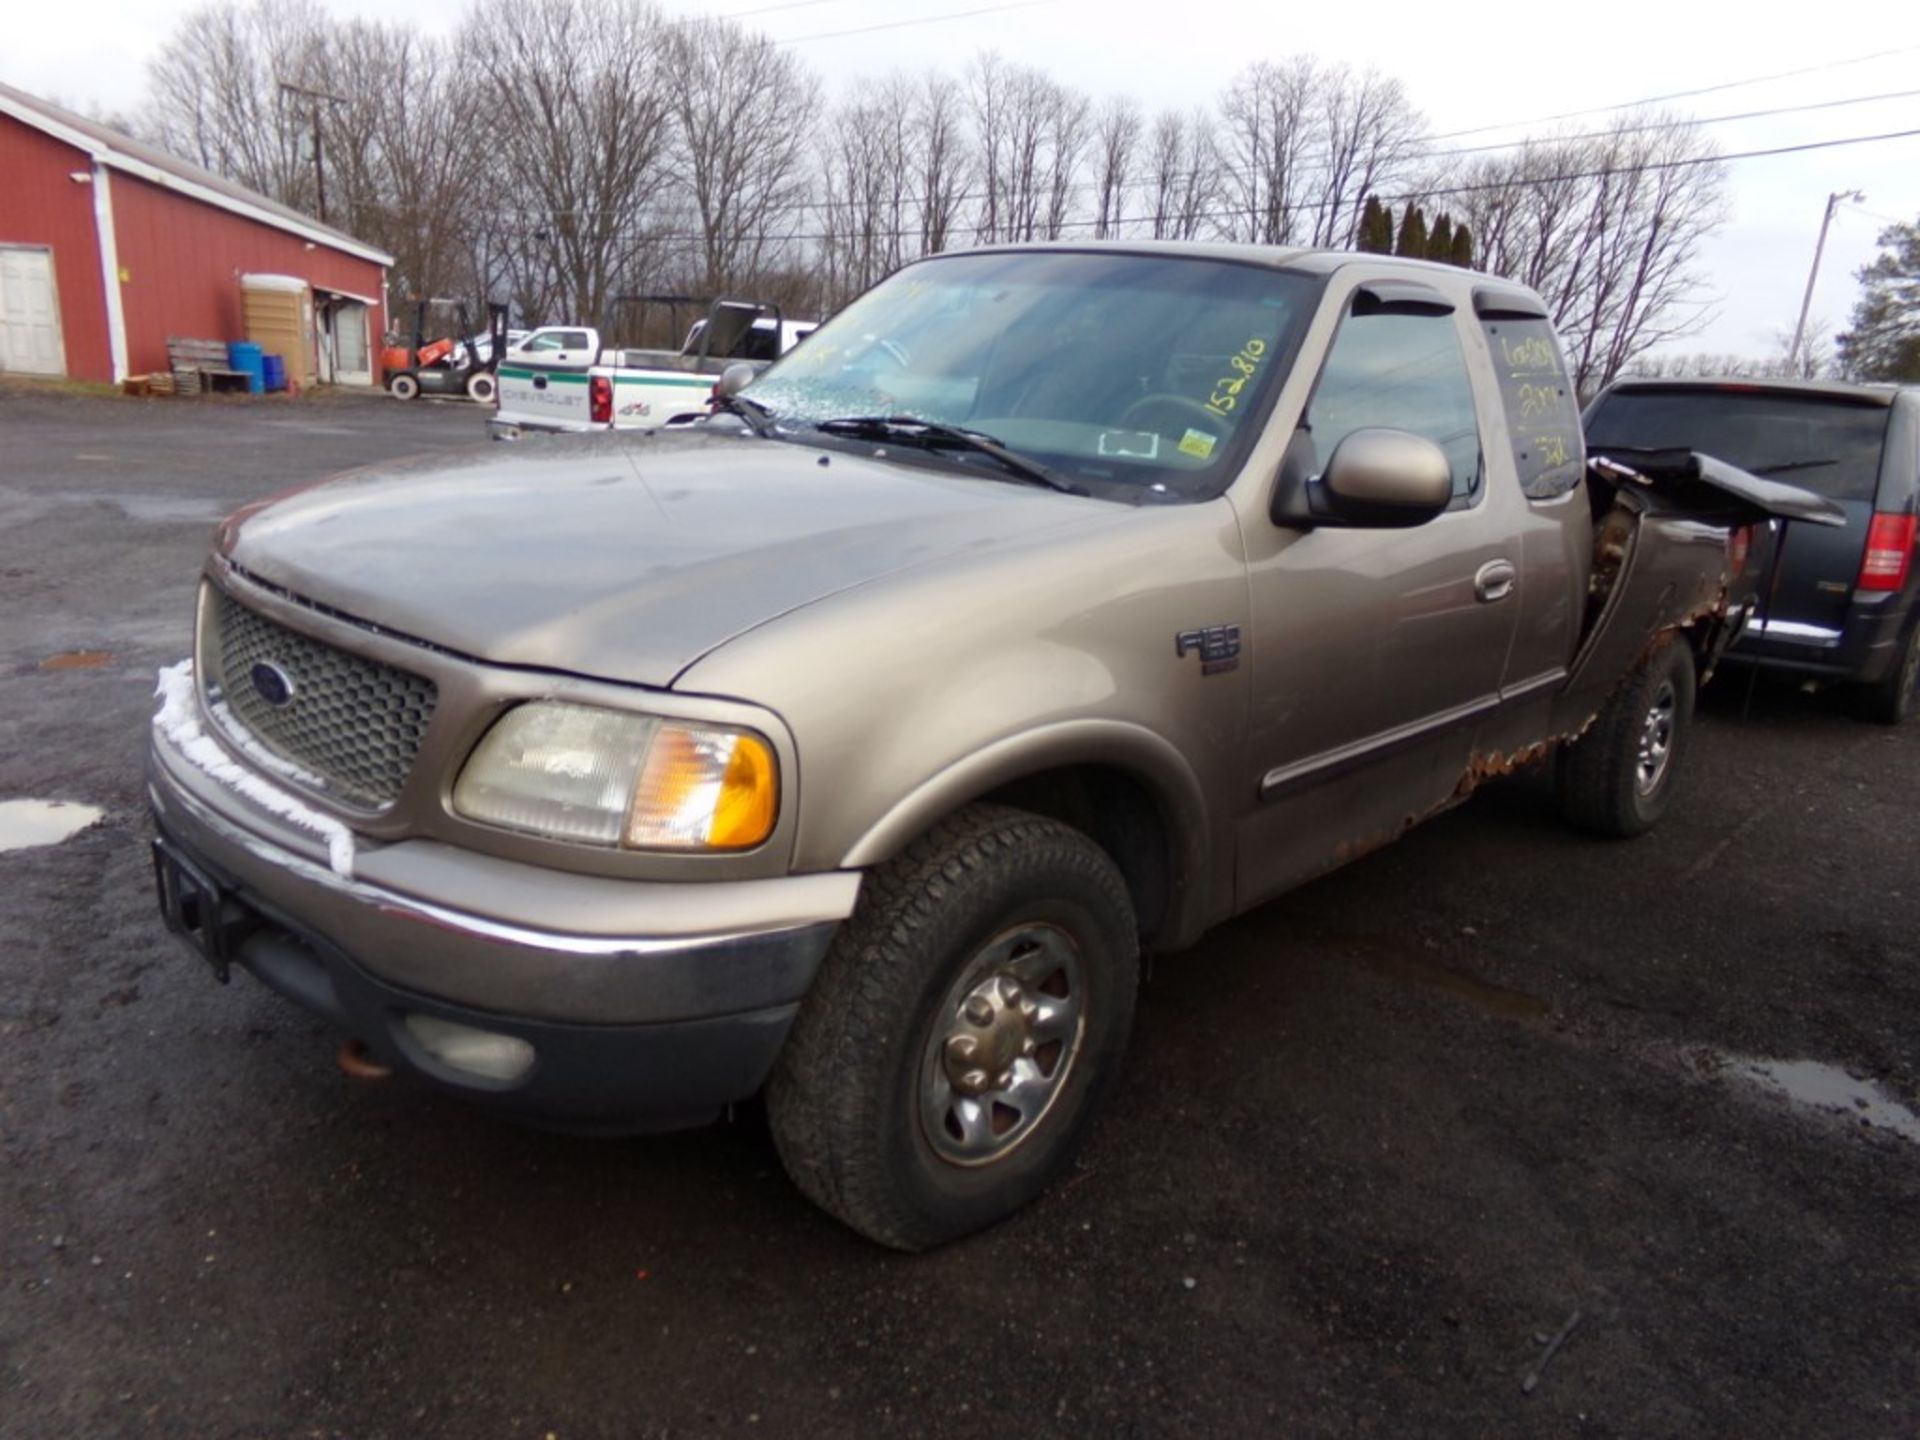 2001 Ford F150 Ext. Cab XLT, 4x4, Tan, 152,810 Miles, VIN#:2FTPX18L41CA89239 - OPEN TO ALL BUYERS,